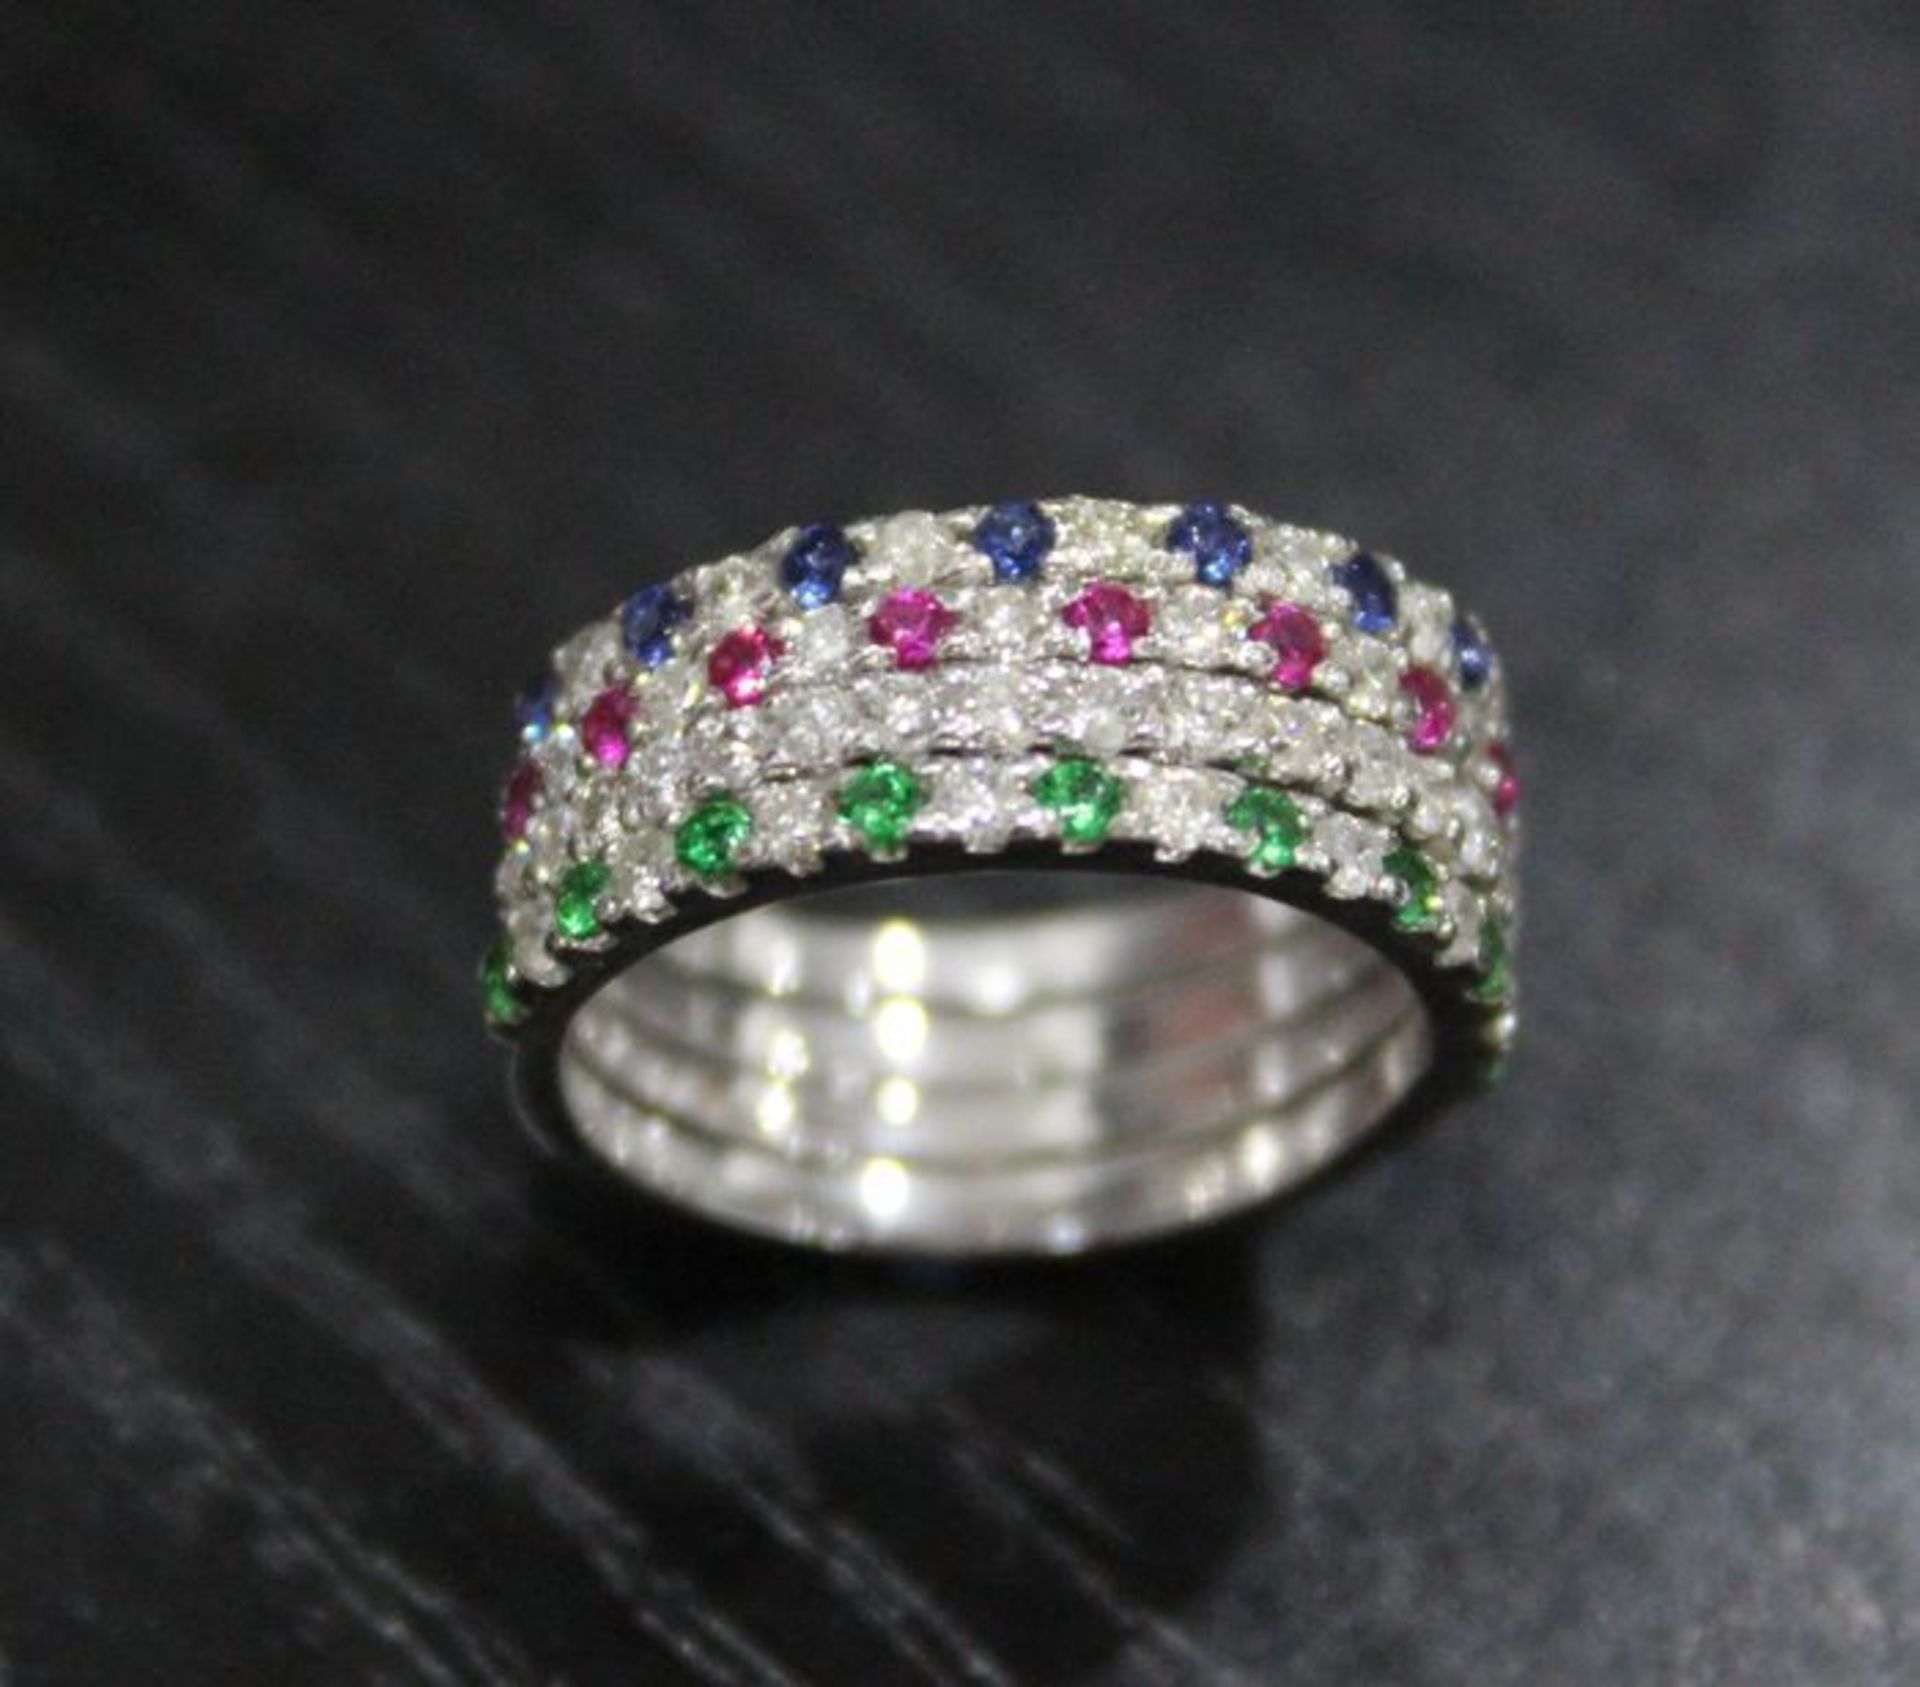 14 K / 585 Set of 4 Diamond, Blue Sapphire, Emerald and Ruby Rings - Image 2 of 4